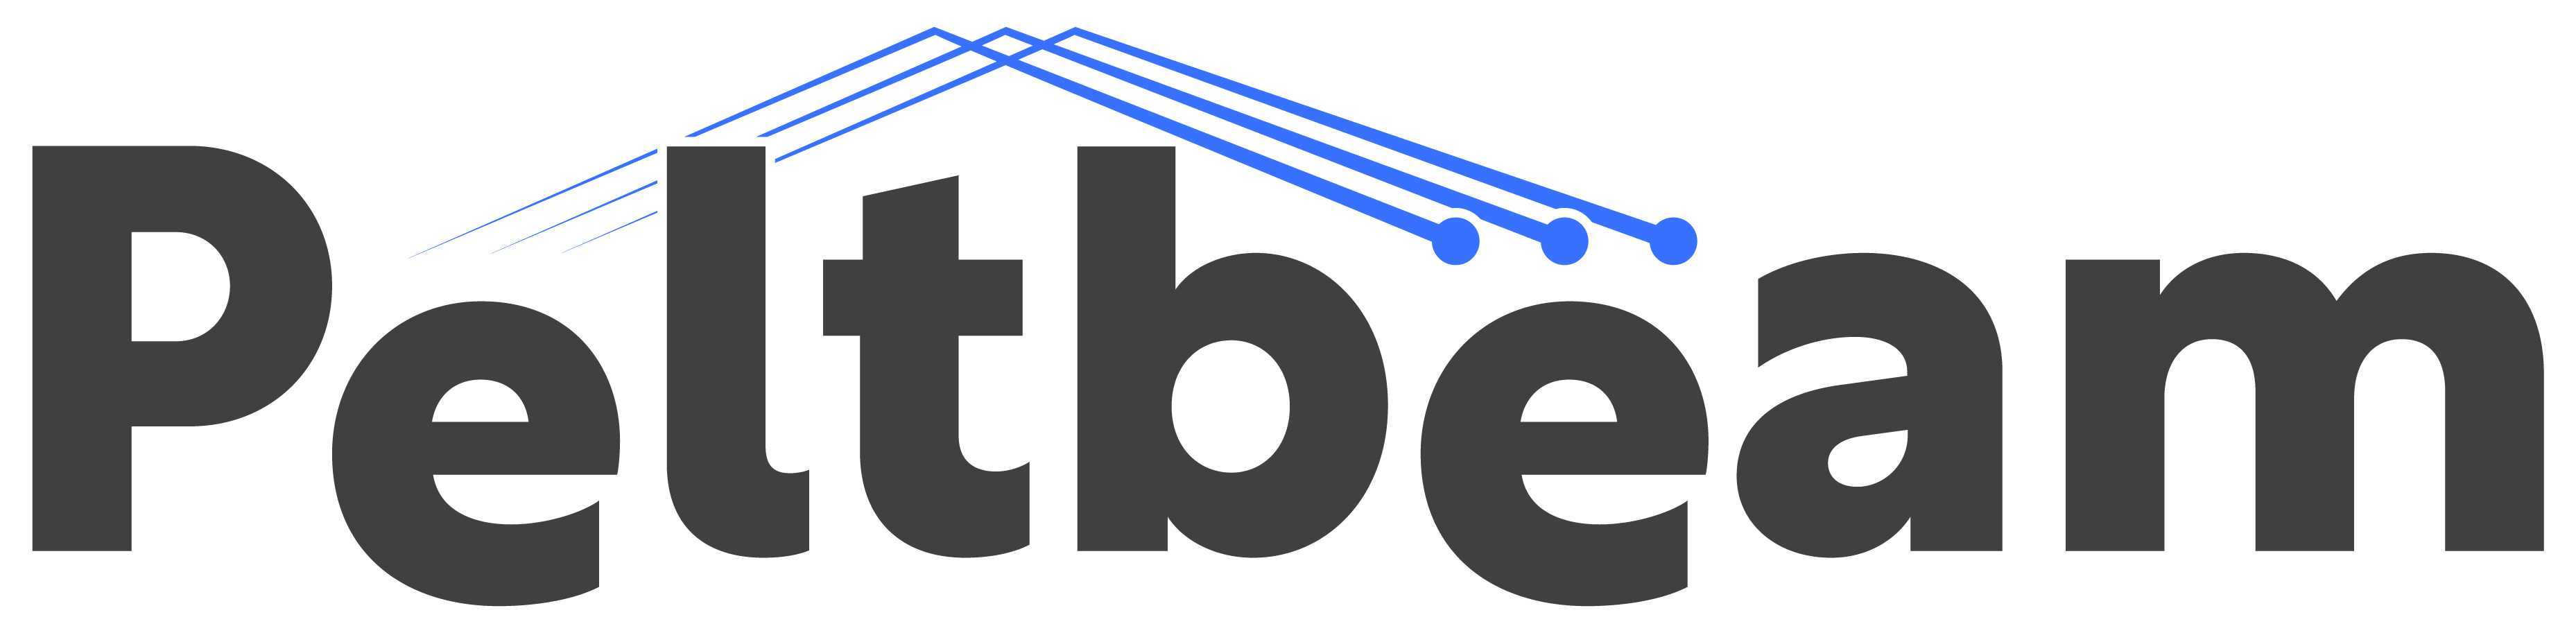 OIG Invests in Peltbeam, a 5G mmWave Technology Company